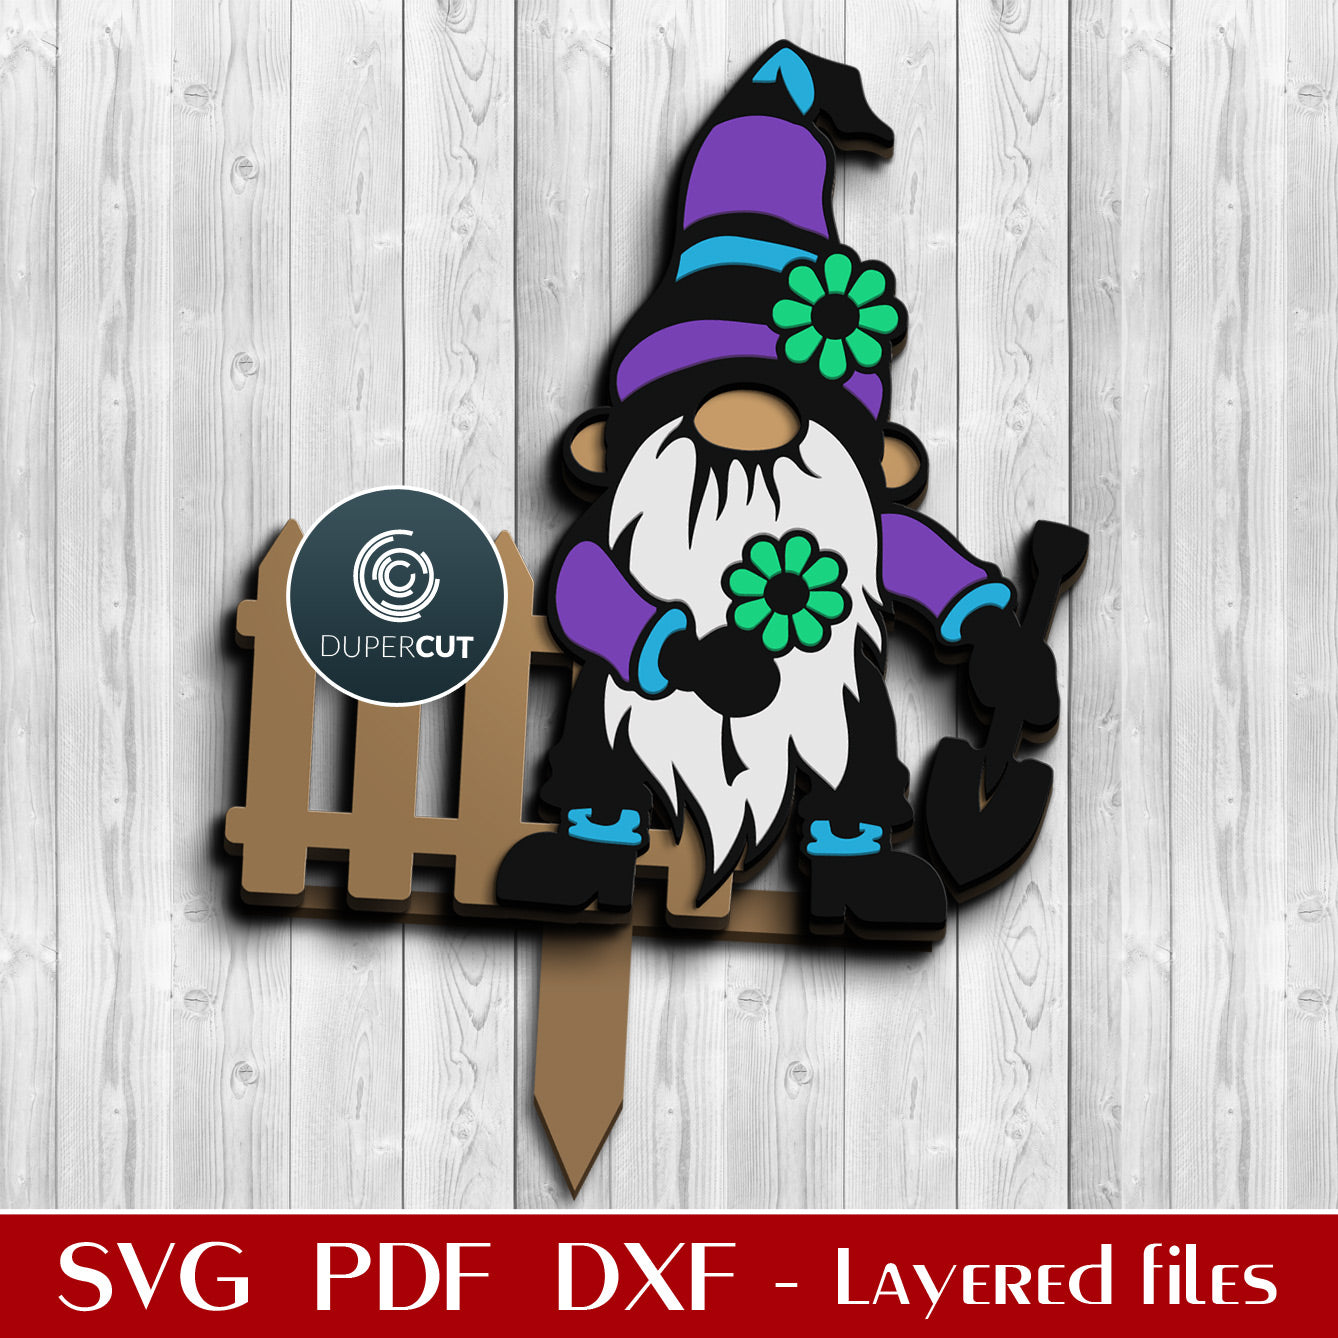 Garden gnome with yard stake decoration - SVG DXF layered cutting files for Glowforge, Cricut, Silhouette cameo, CNC pattern by DuperCut.com